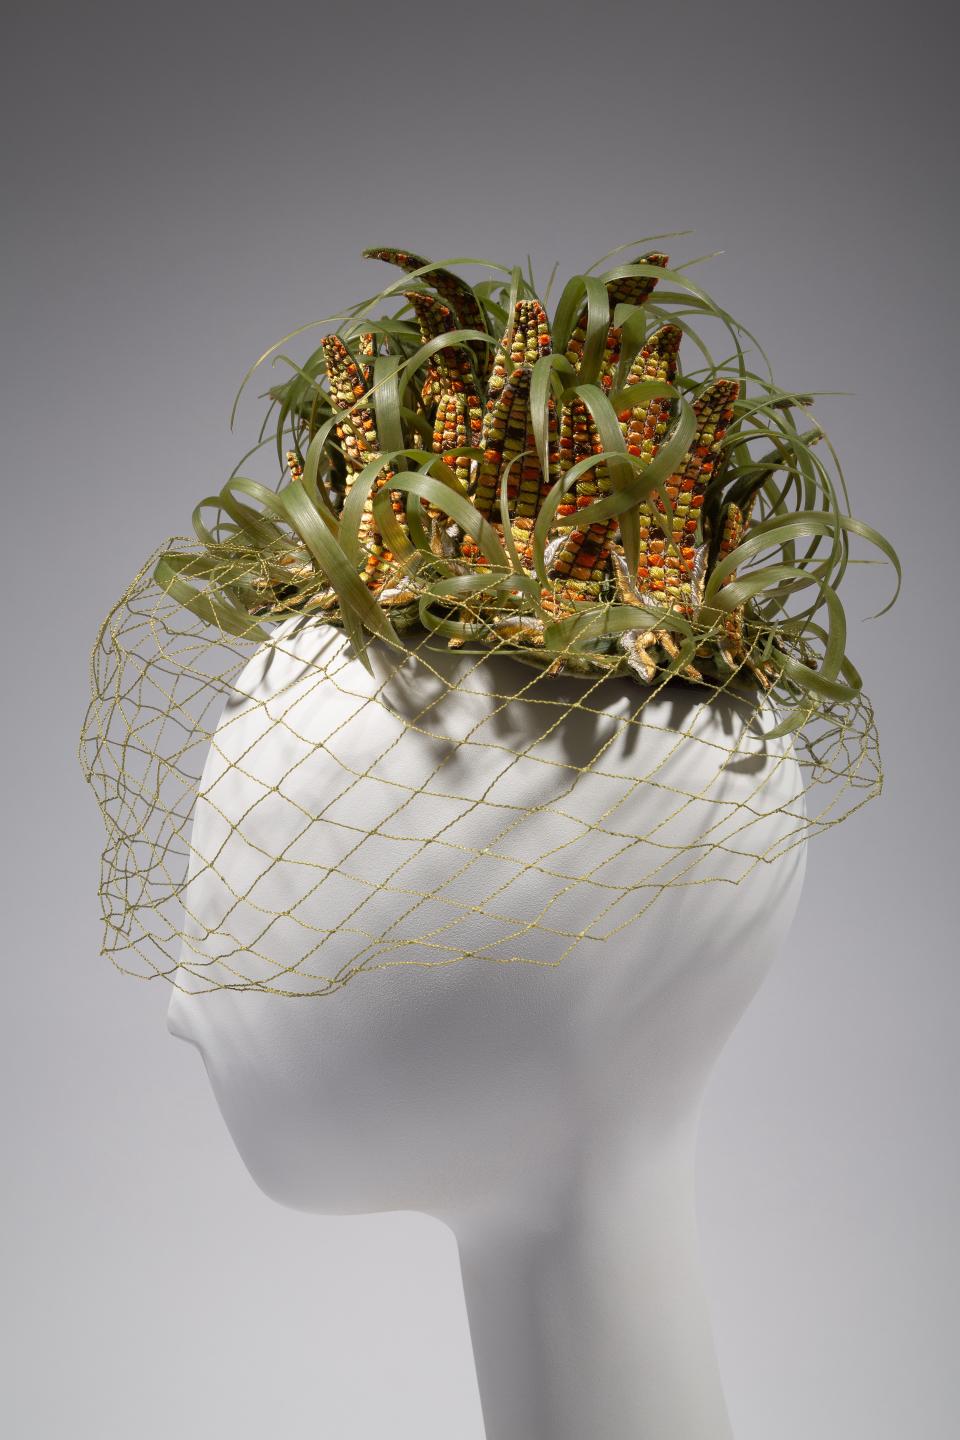 A corn hat by Bes Ben c. 1962—1965. (Eileen Costa / Courtesy Museum at FIT)